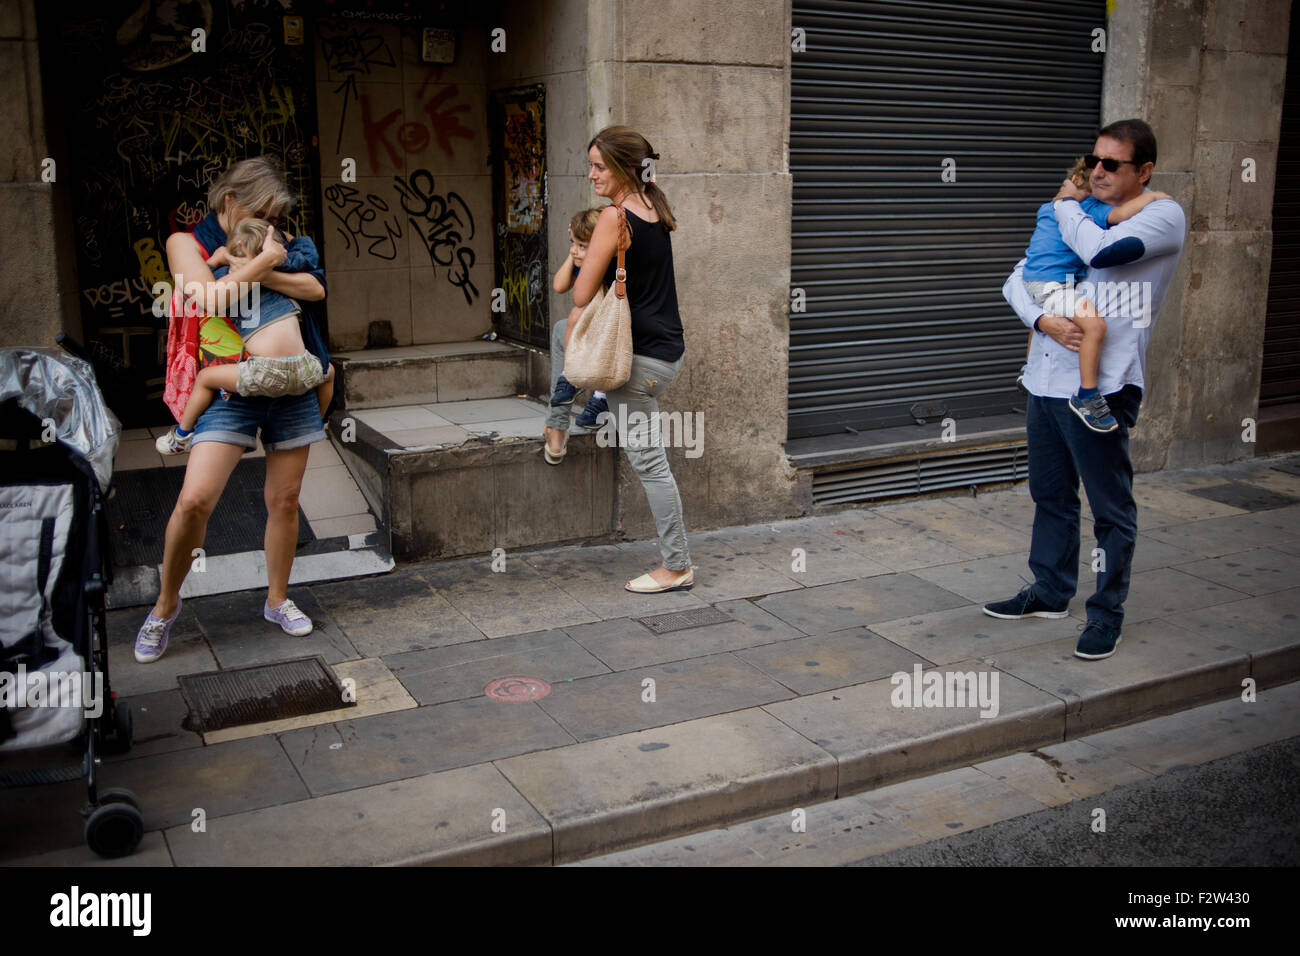 Barcelona, Catalonia, Spain. 24th Sep, 2015. Adults comfort to frightened children while Trabucaires shoot his blunderbusses through the streets of Barcelona on the occasion of the celebrations of the Merce Festival (Festes de la Merce) on 24 September 2015, Spain. The Galejada Trabucairemarks the beginning of the day of the patron saint of Barcelona, La Merce. Men and women dressed as ancient Catalan bandits take to the streets of the old part of Barcelona and cause a loud noise with his blunderbusses full of gunpowder. © Jordi Boixareu/ZUMA Wire/Alamy Live News Stock Photo